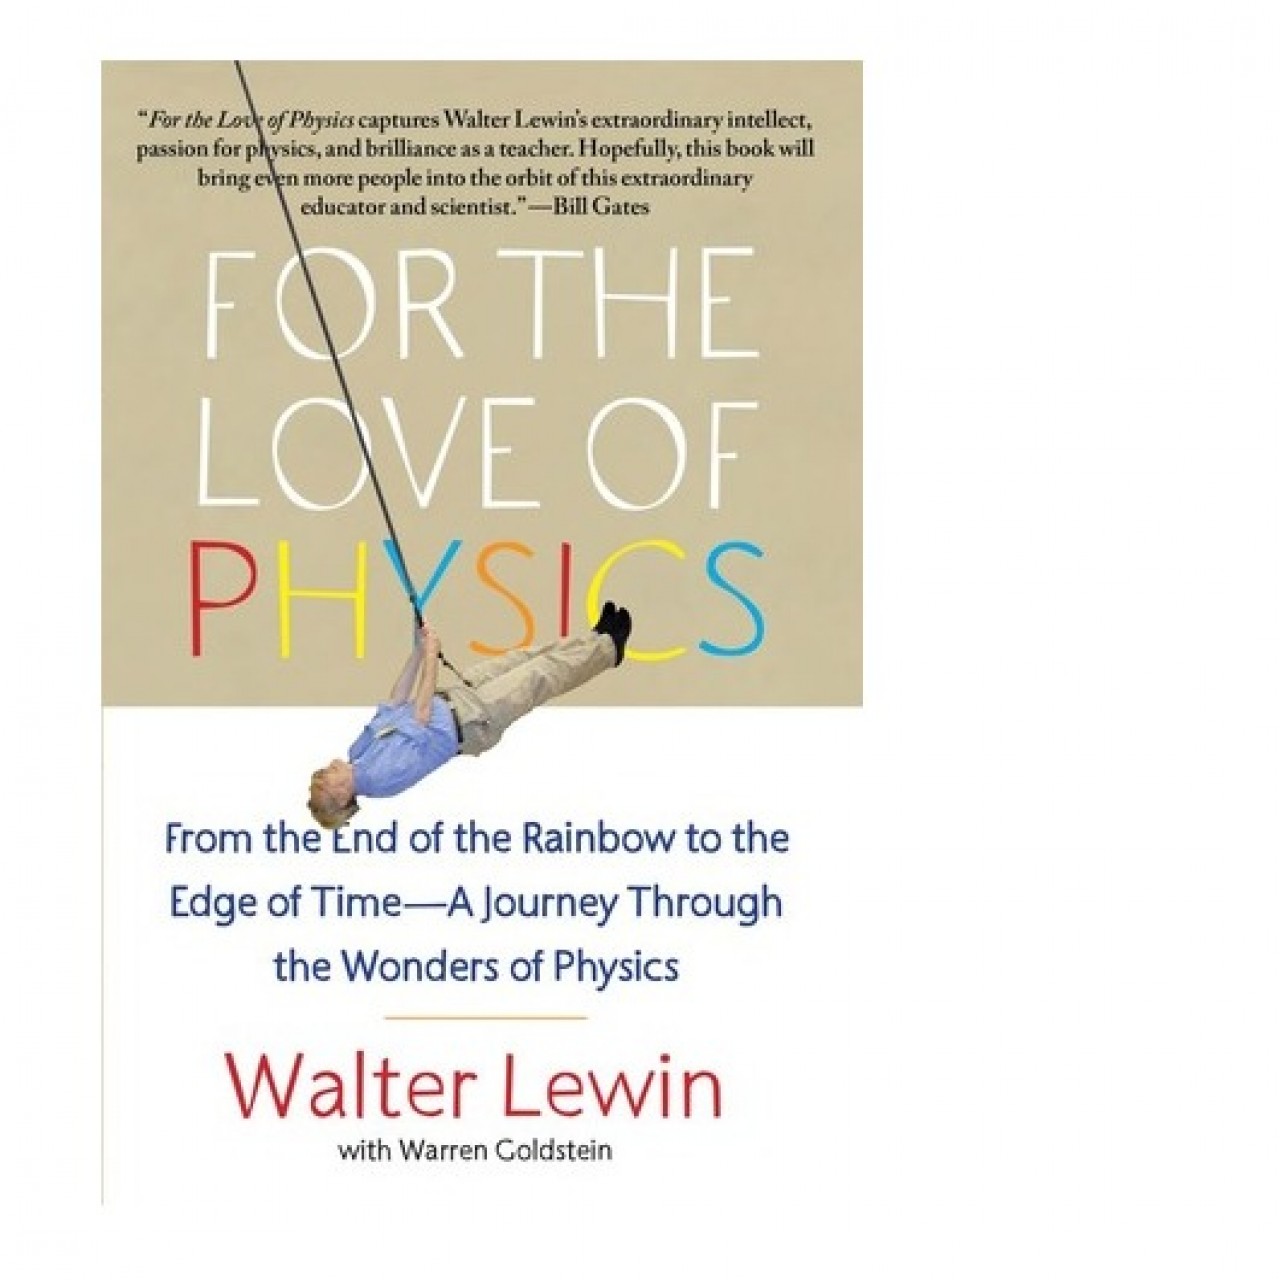 For The Love of Physics by Walter Lewin